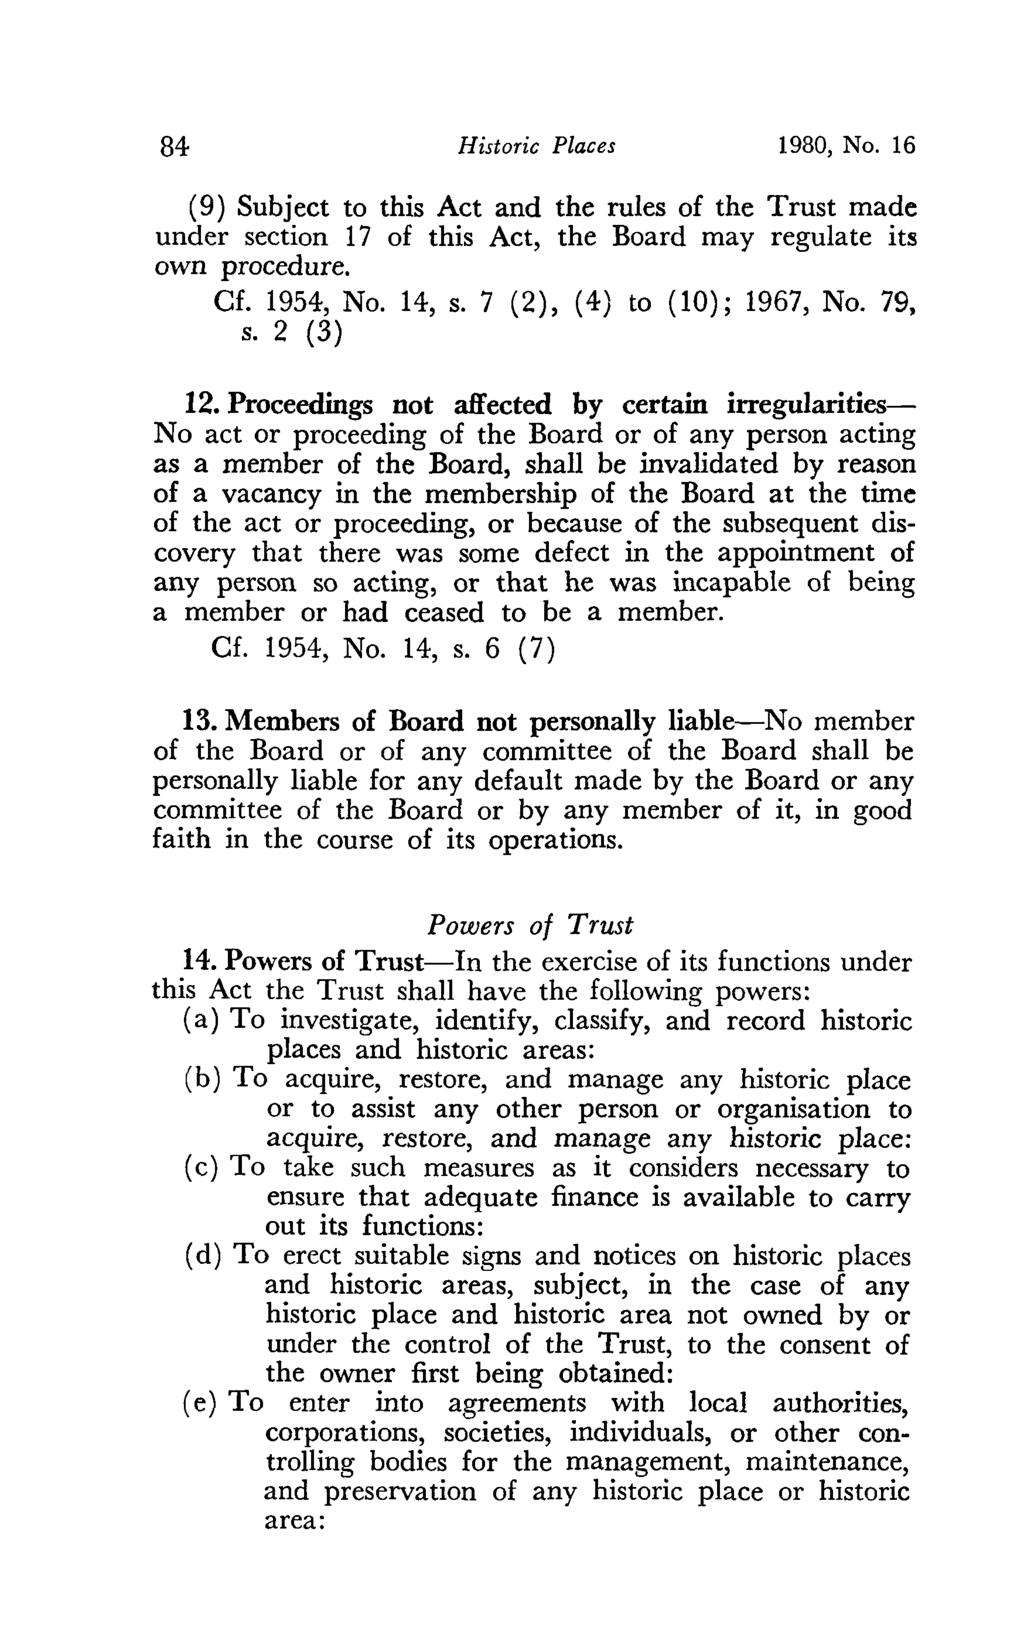 84 Historic Places 1980, No. 16 (9) Subject to this Act and the rules of the Trust made under section 17 of this Act, the Board may regulate its own procedure. Cf. 1954, No. 14, s.